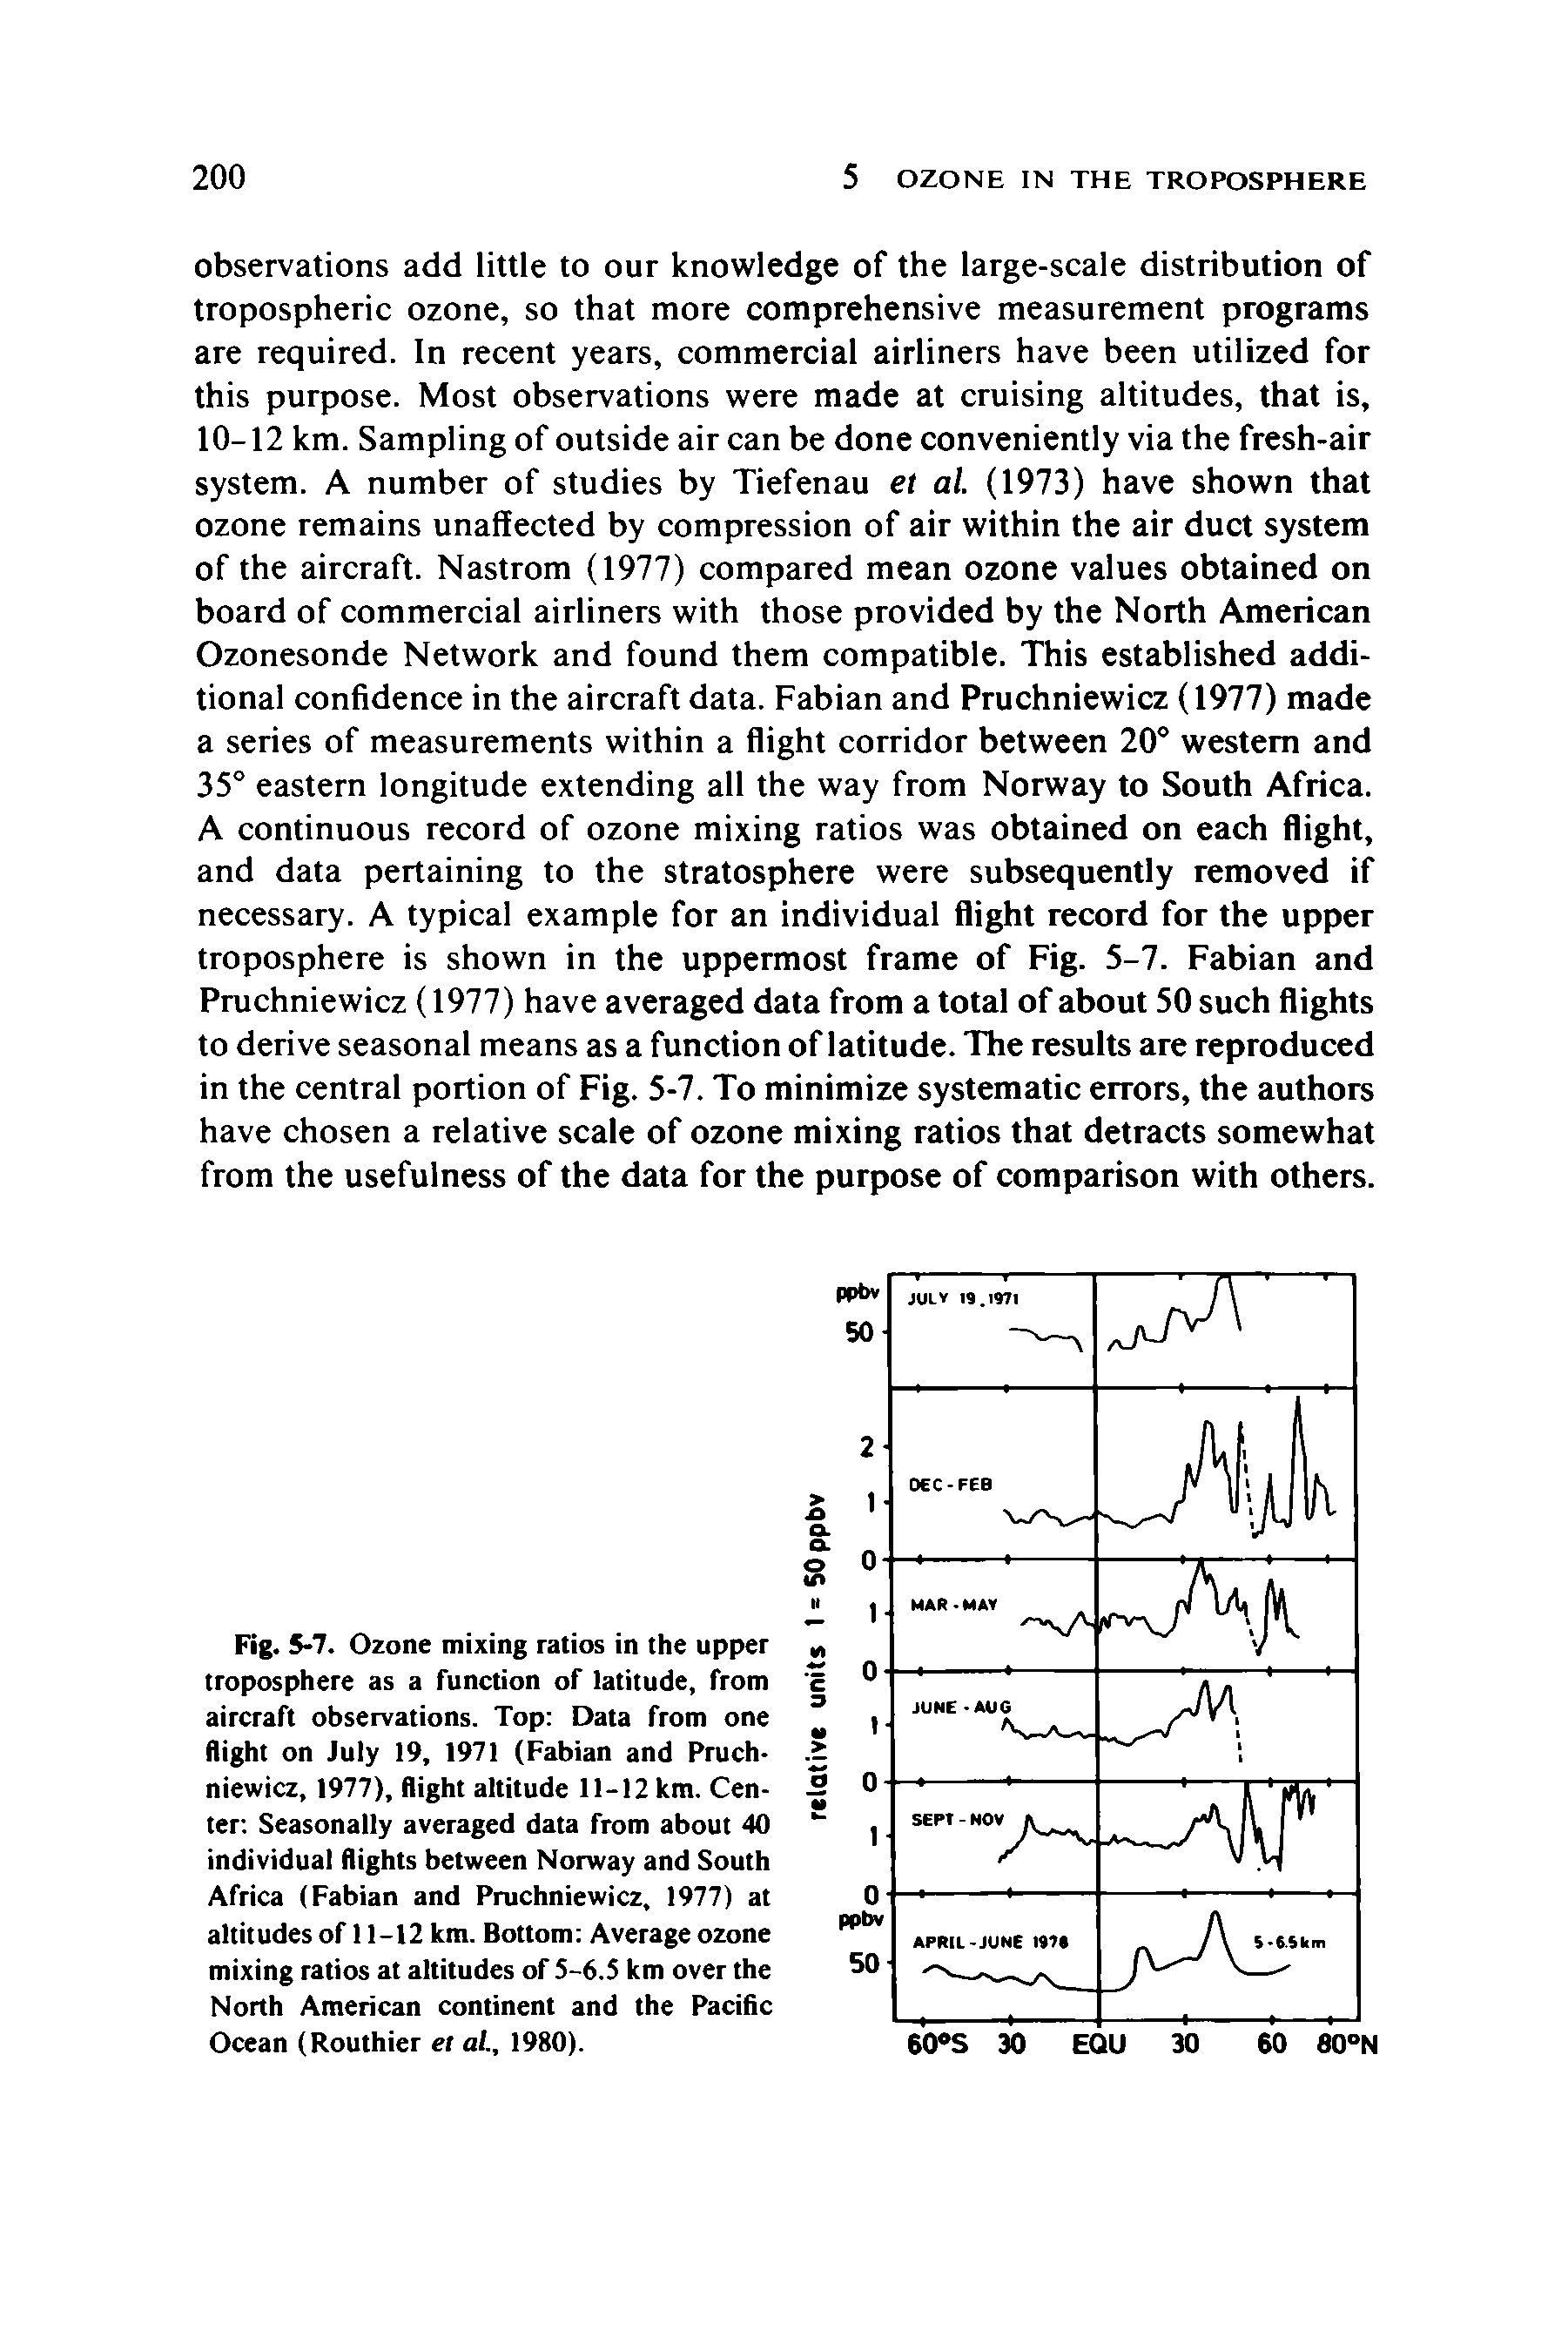 Fig. 5-7. Ozone mixing ratios in the upper troposphere as a function of latitude, from aircraft observations. Top Data from one flight on July 19, 1971 (Fabian and Pruchniewicz, 1977), flight altitude 11-12 km. Center. Seasonally averaged data from about 40 individual flights between Norway and South Africa (Fabian and Pruchniewicz, 1977) at altitudes of 11-12 km. Bottom Average ozone mixing ratios at altitudes of 5-6.5 km over the North American continent and the Pacific Ocean (Routhier et al, 1980).